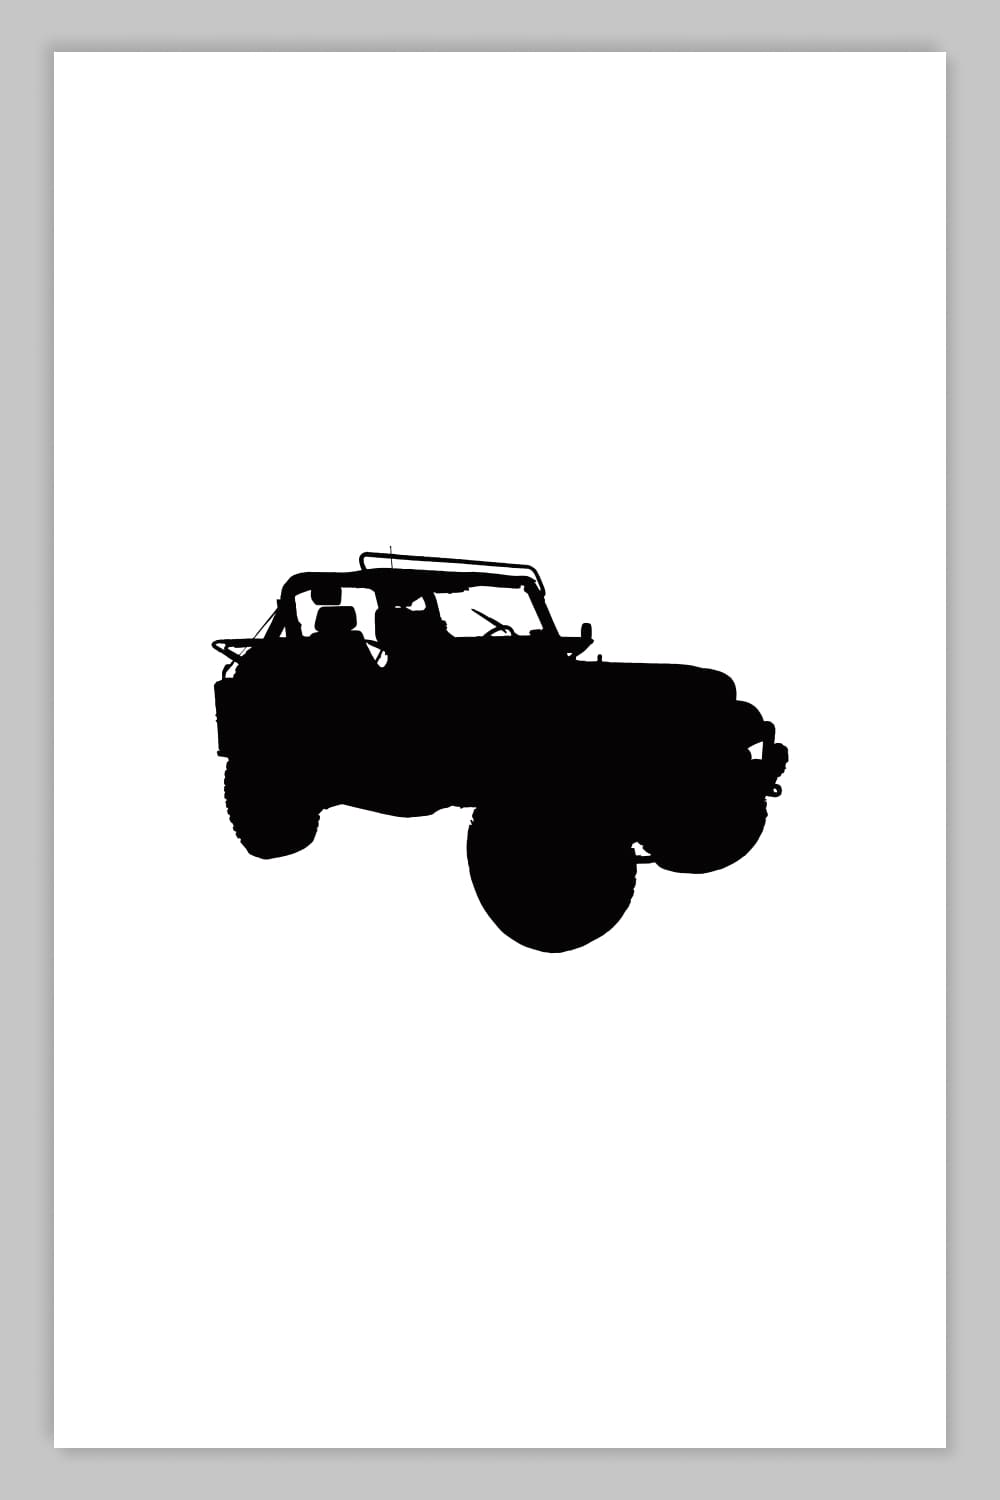 Black highly detailed Jeep Wrangler silhouette isolated on white background.